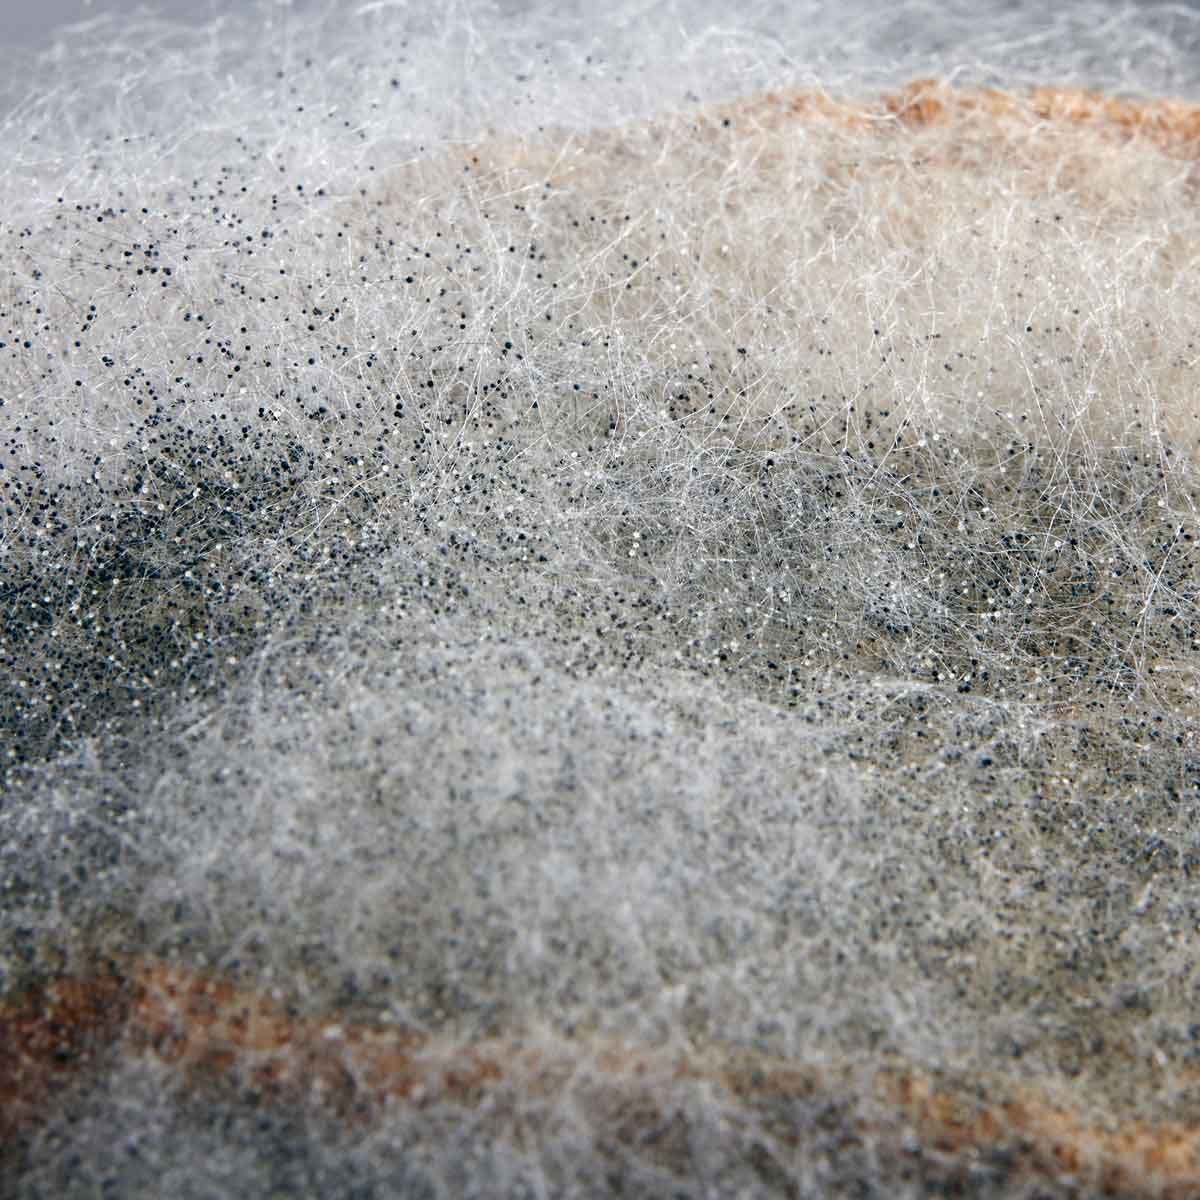 What to Know About Rhizopus Stolonifer (Black Bread) Mold